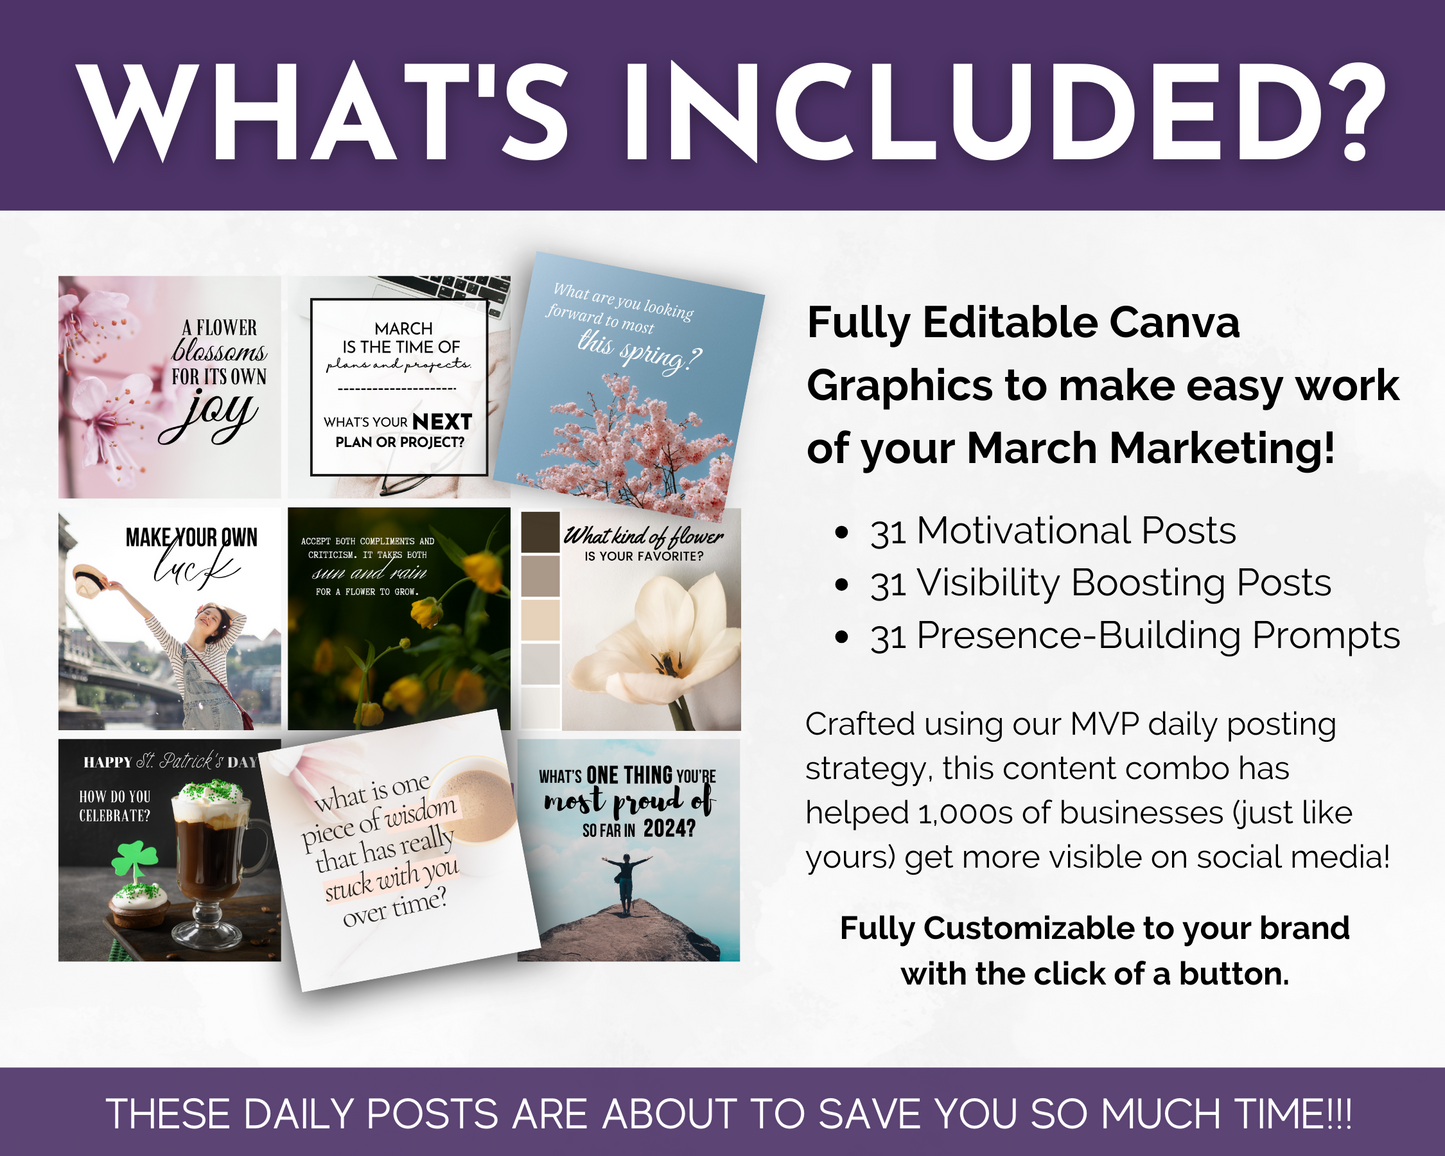 Discover what is included in the March Daily Posting Plan - Your Social Plan bundle from Get Socially Inclined, featuring a strong social media presence and engaging content creation.